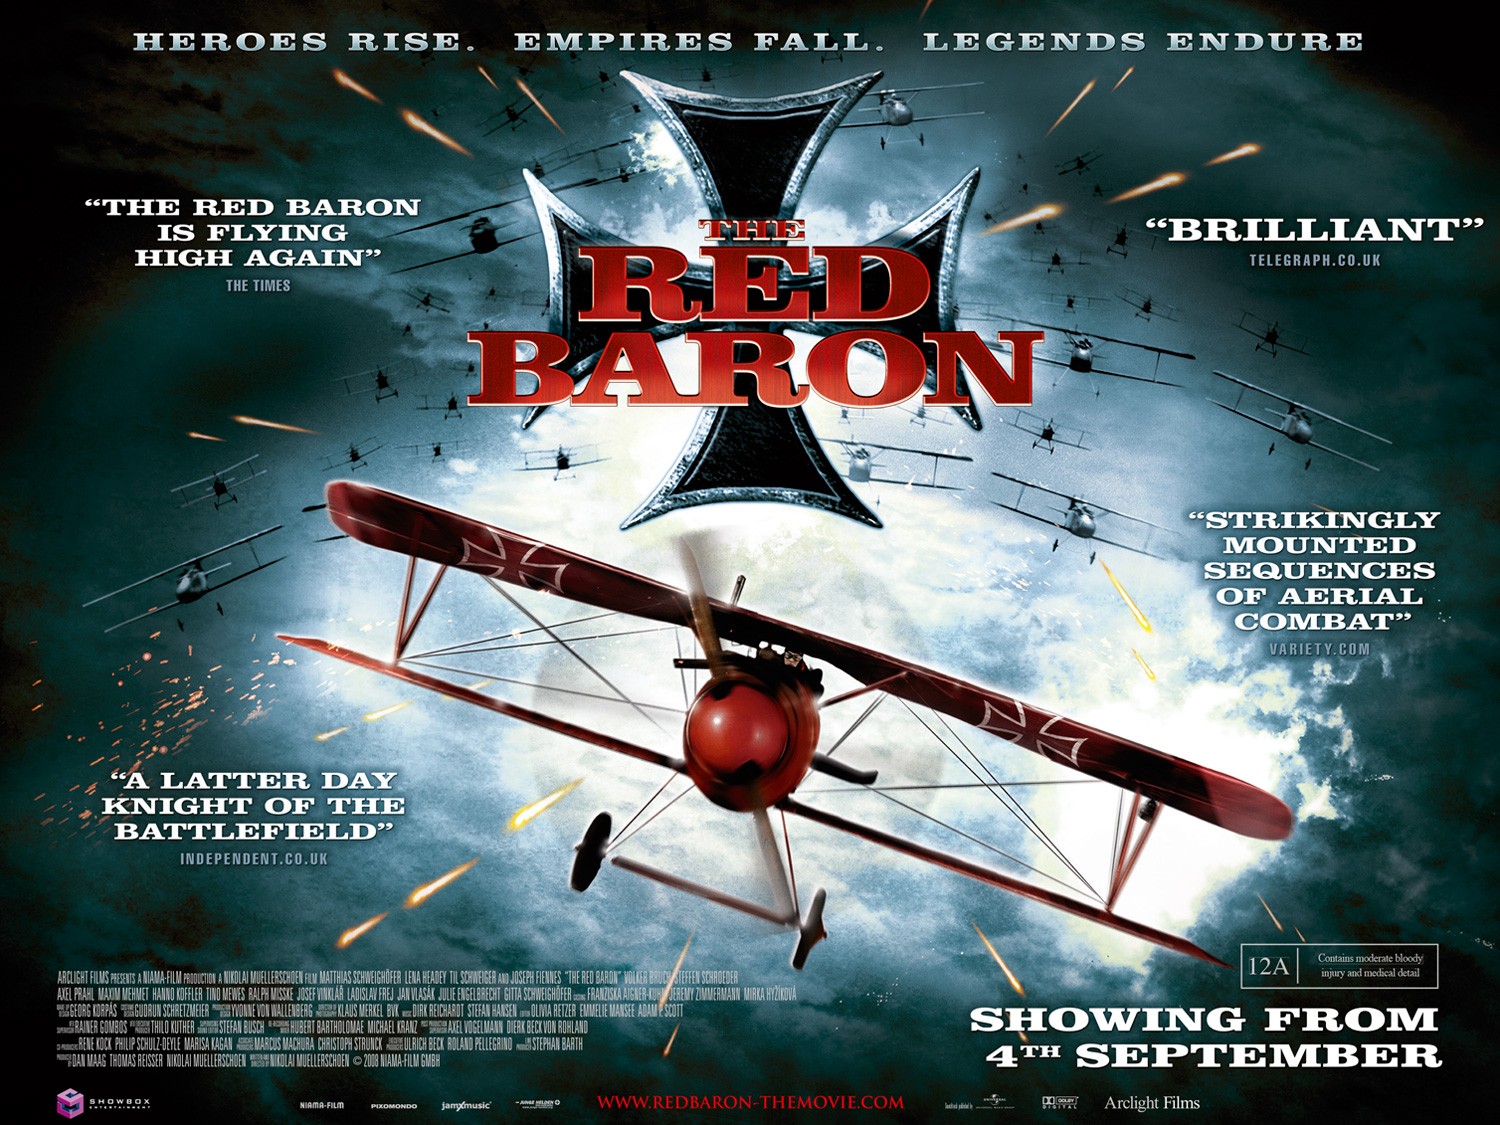 Return of the Red Baron